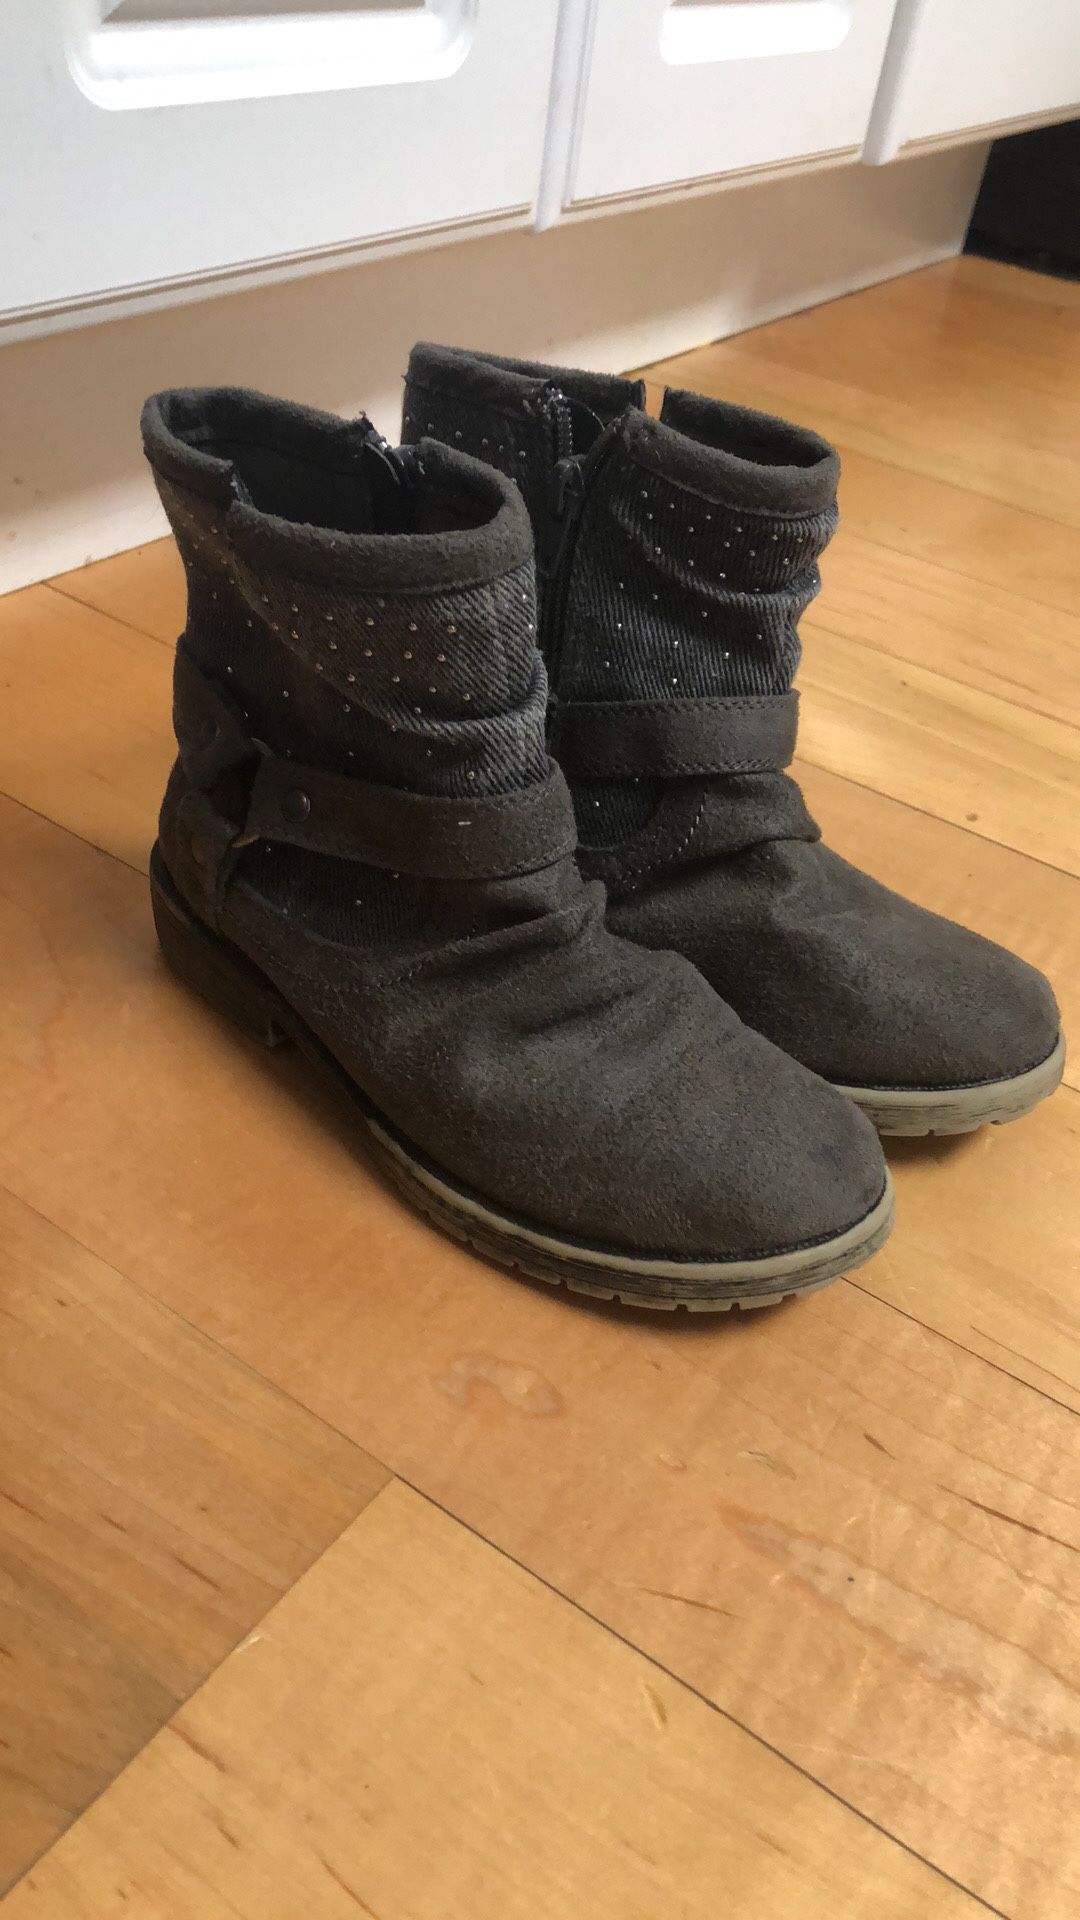 Girls boots size 13